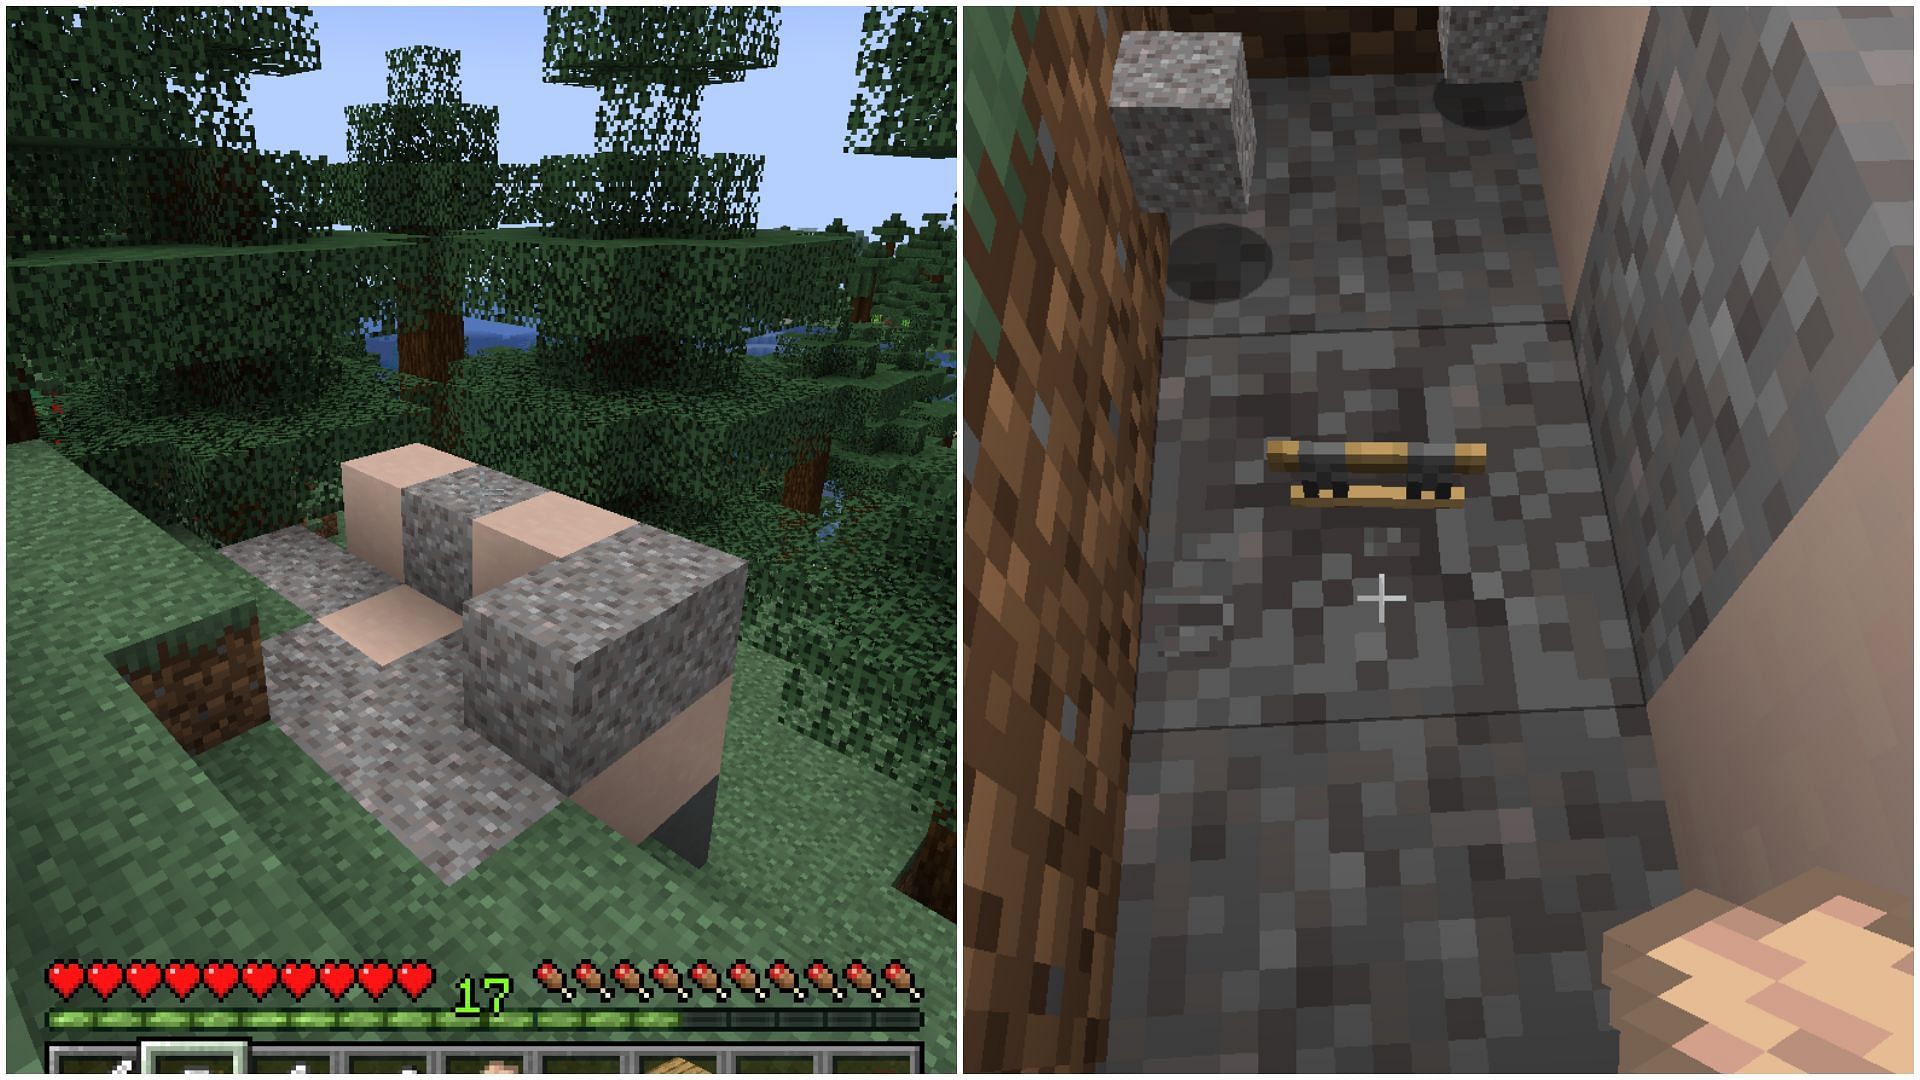 Trail Ruins are fun to excavate once you find it in Minecraft (Image via Mojang)